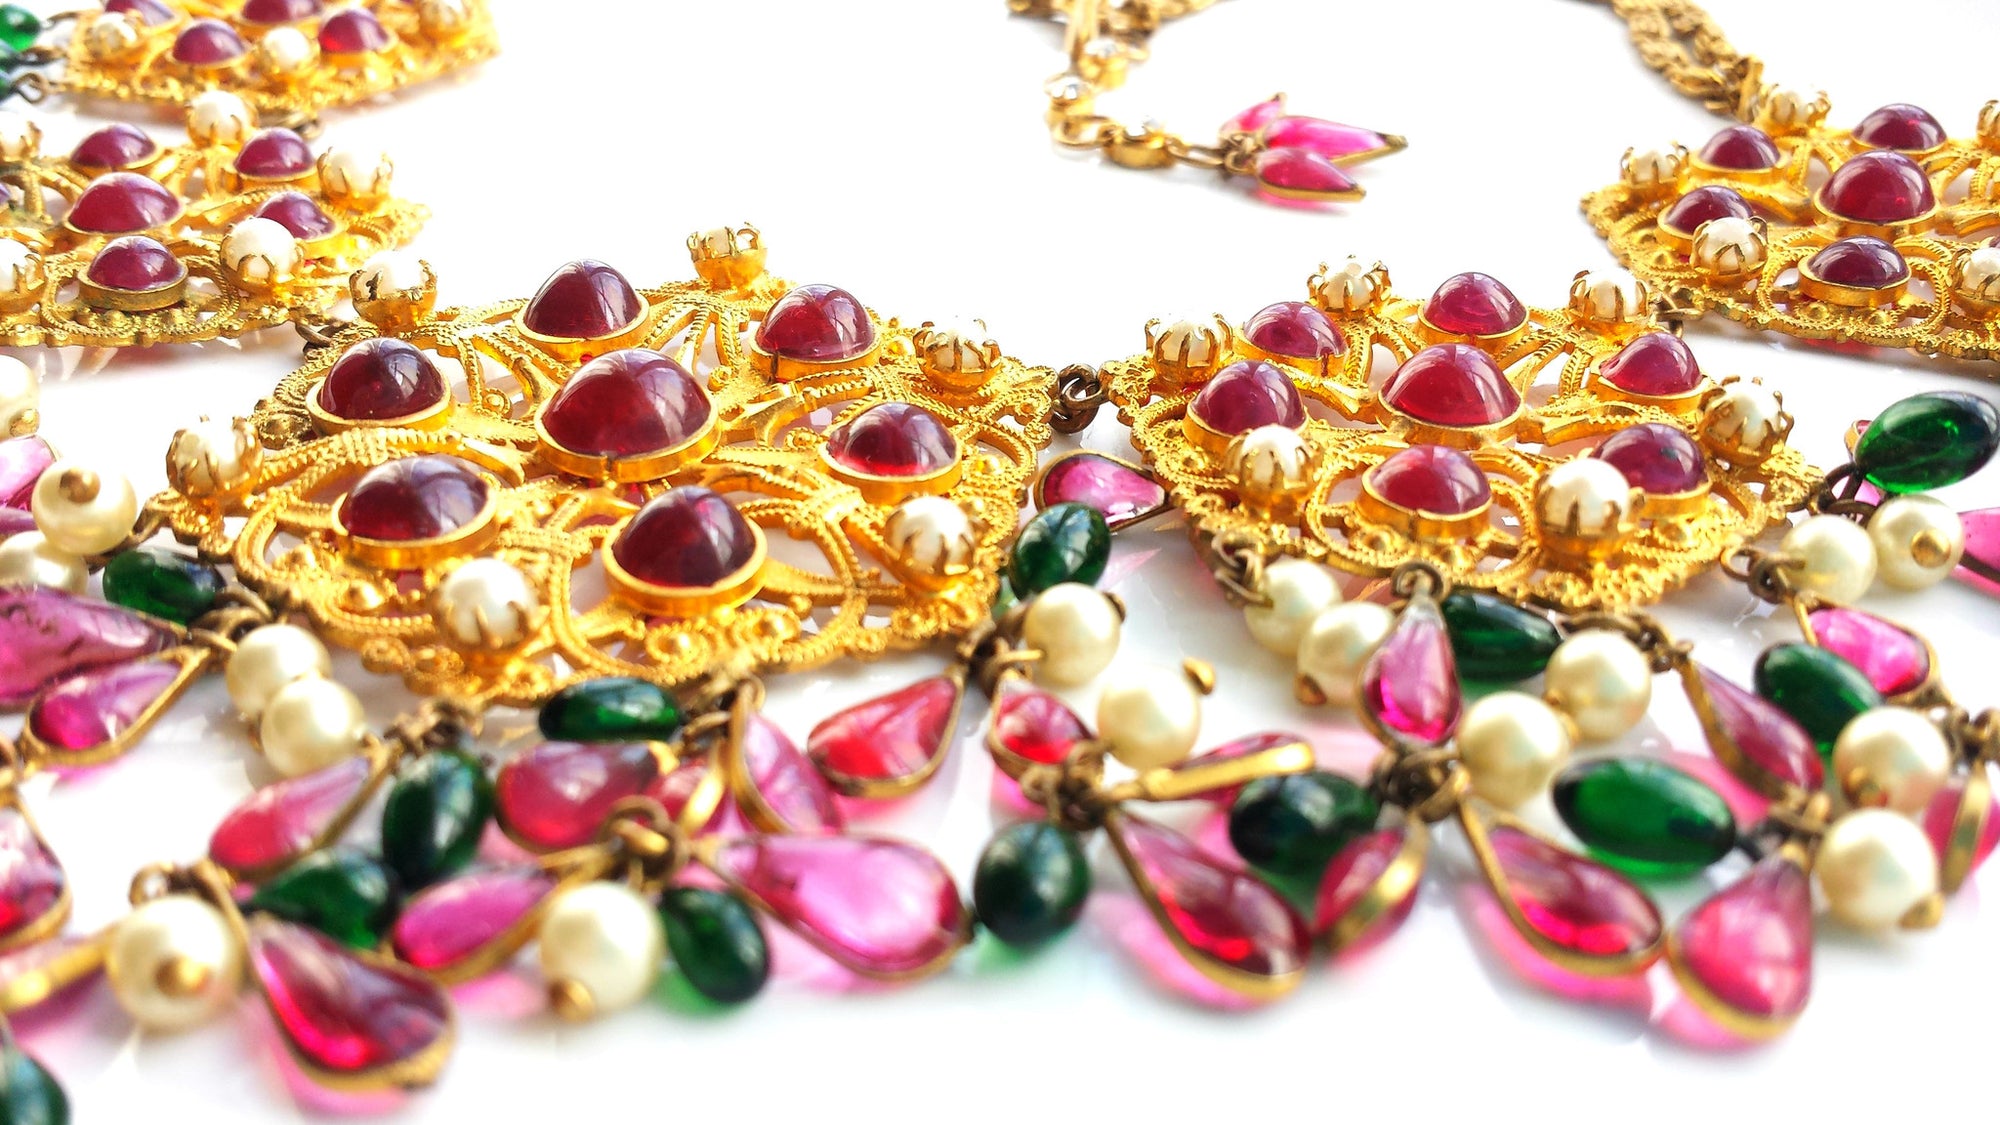 Important Vintage 1940s Chanel Gripoix Mughal/Moghul Ruby Emerald Pearl Necklace